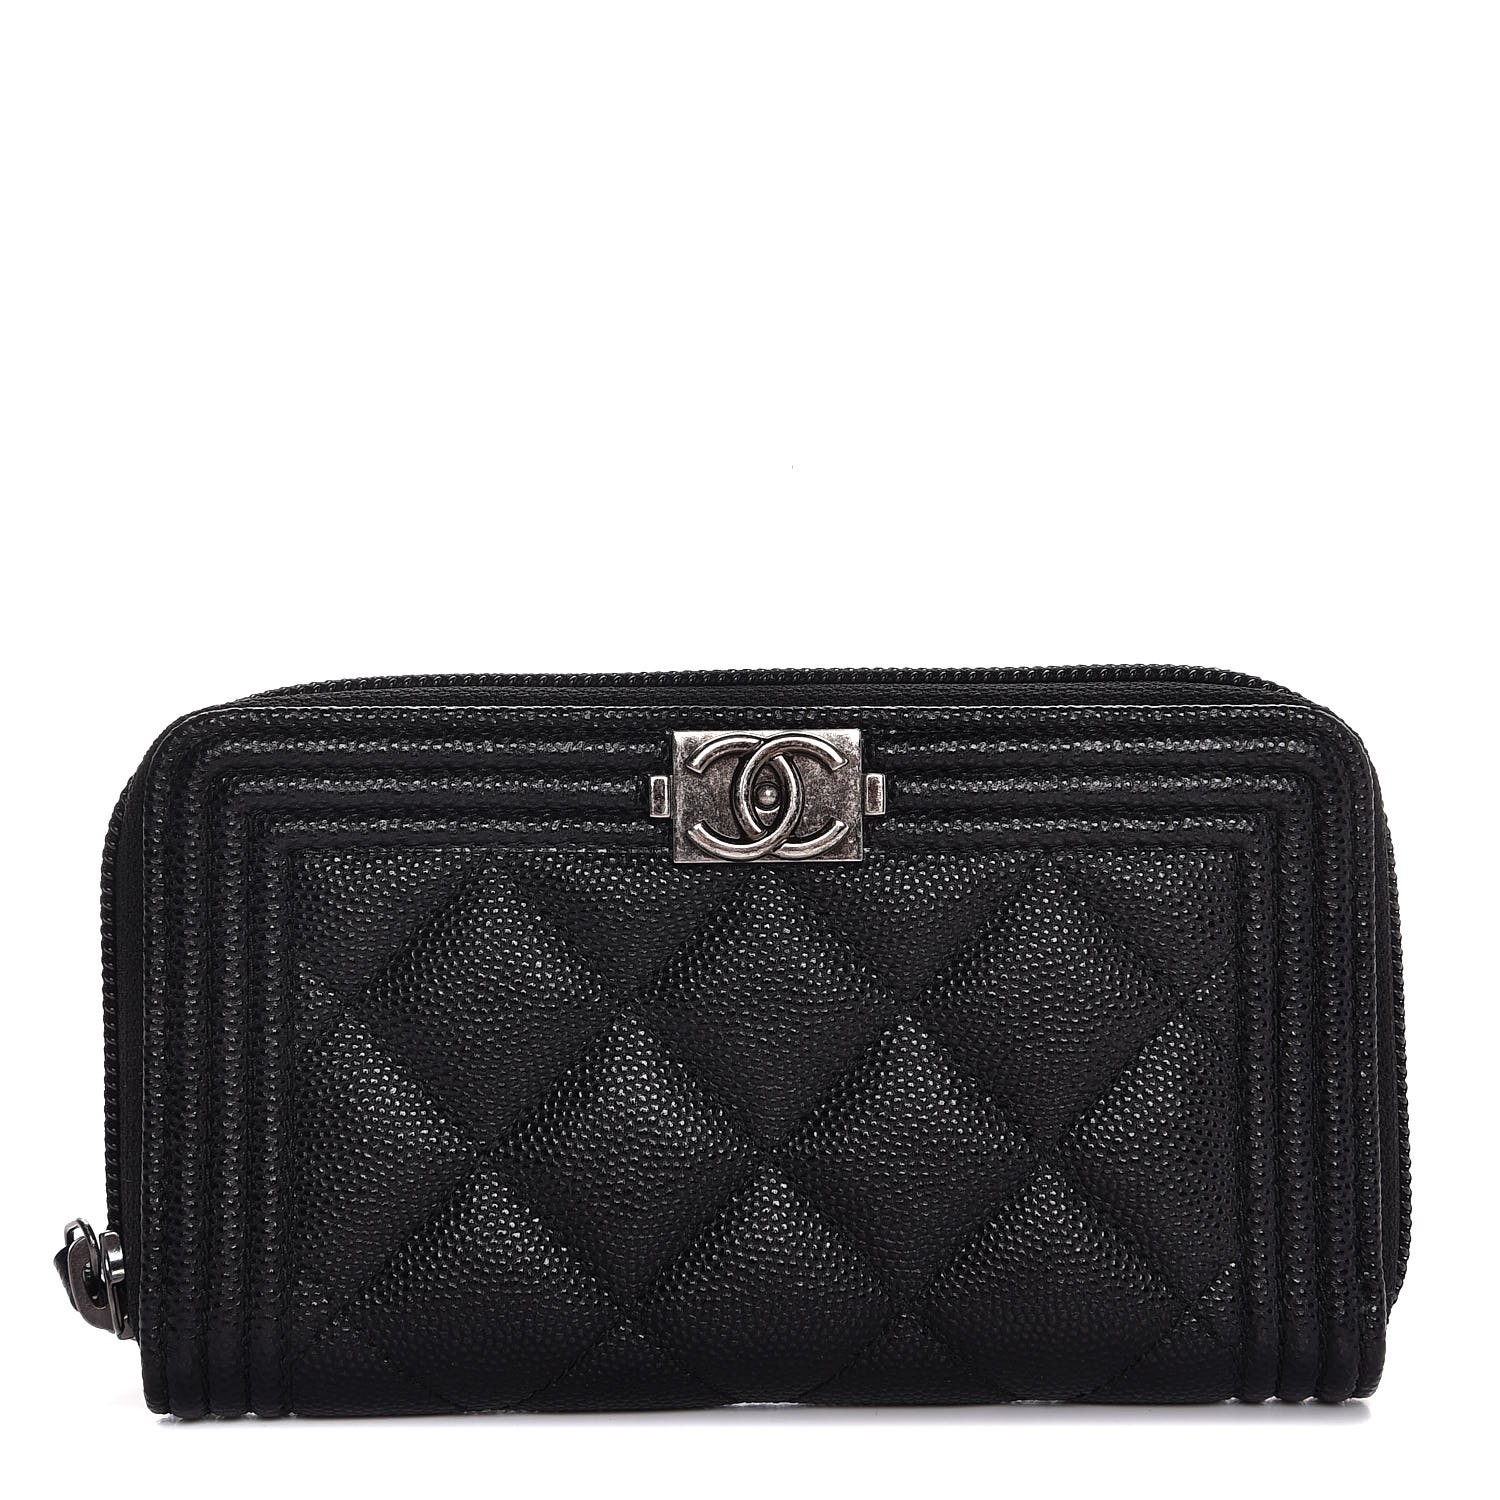 CHANEL Caviar Quilted Boy Small Zip Around Wallet Black 318772